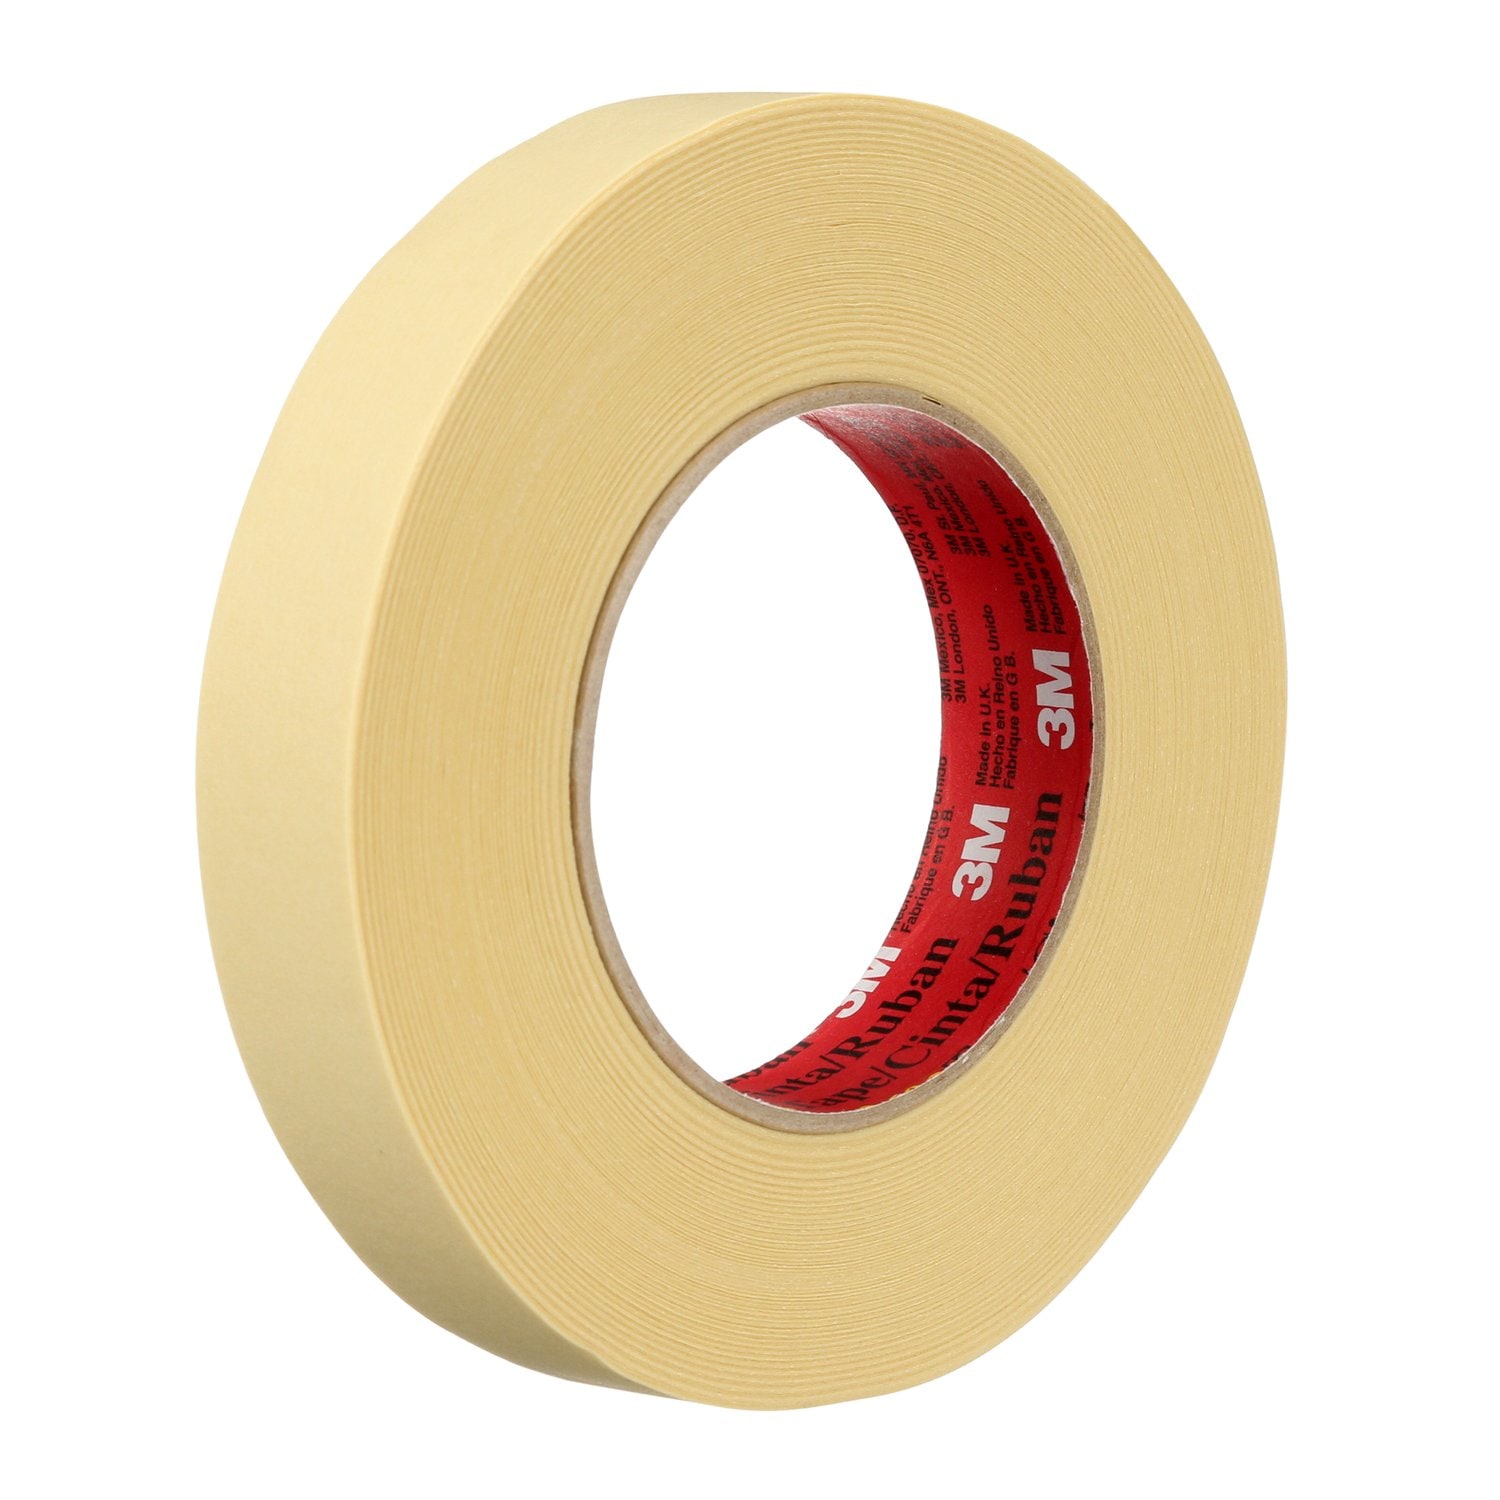 Pro 406 Double Sided Tape, Clear w/ Liner - 2 x 35yd - Neon